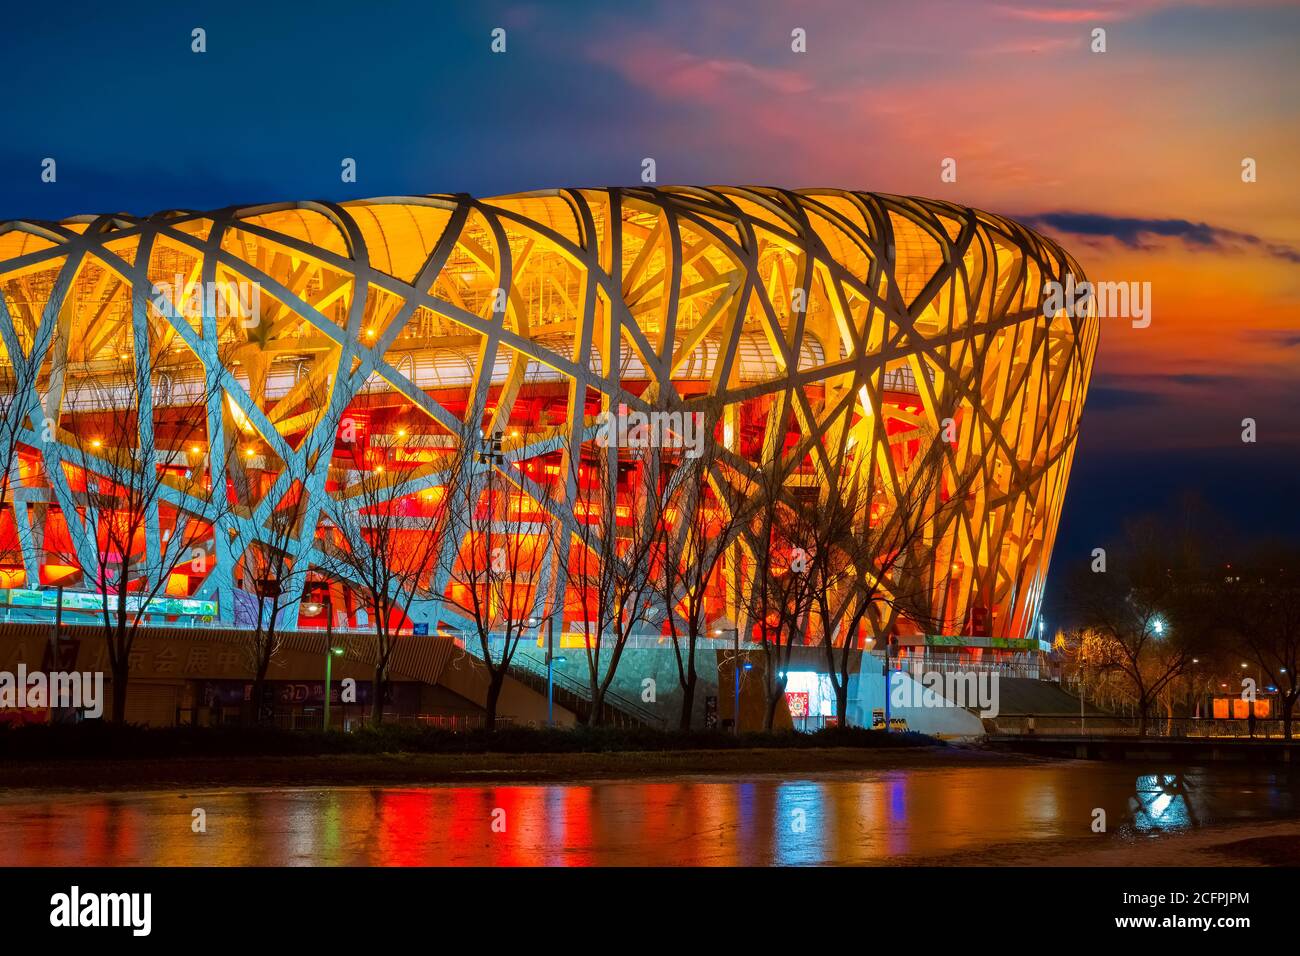 Beijing, China - Jan 11 2020: The national Stadium (AKA Bird's Nest) built for 2008 Summer Olympics, Paralympics and will be used again in the 2022 wi Stock Photo